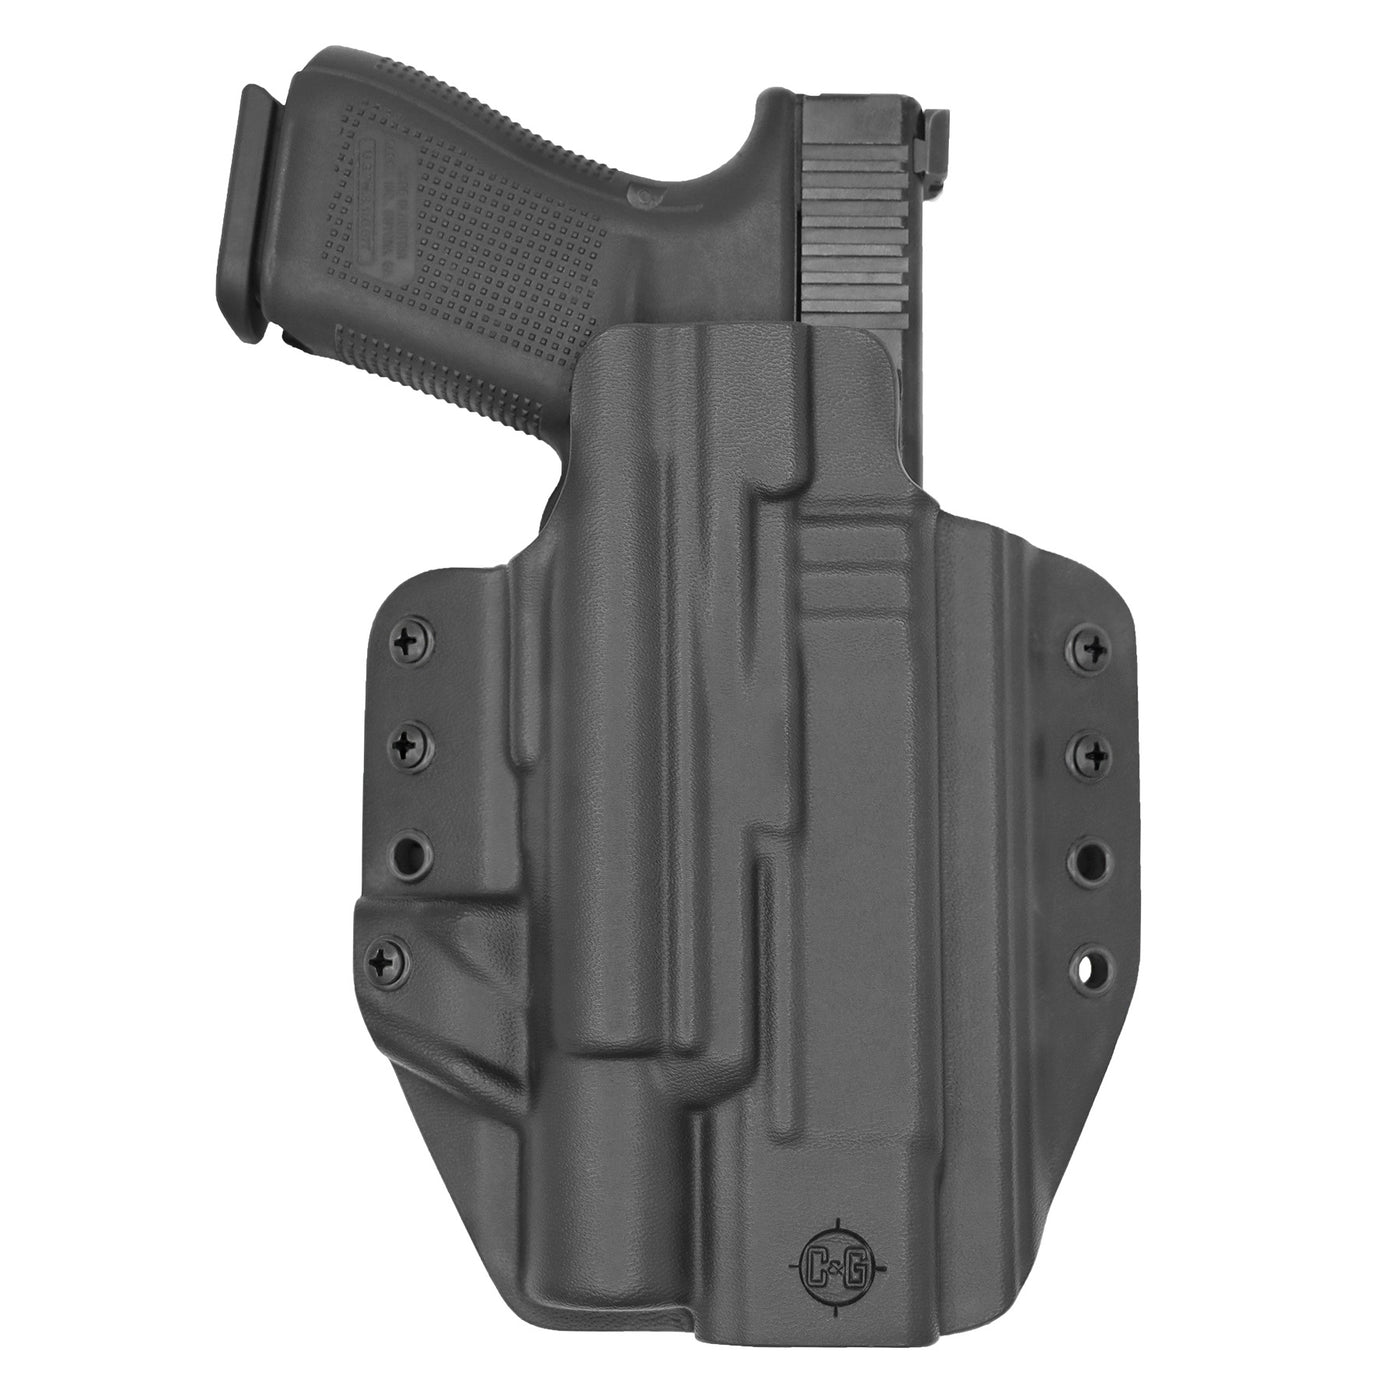 C&G Holsters custom OWB Tactical Shadow Systems Surefire X300 holstered